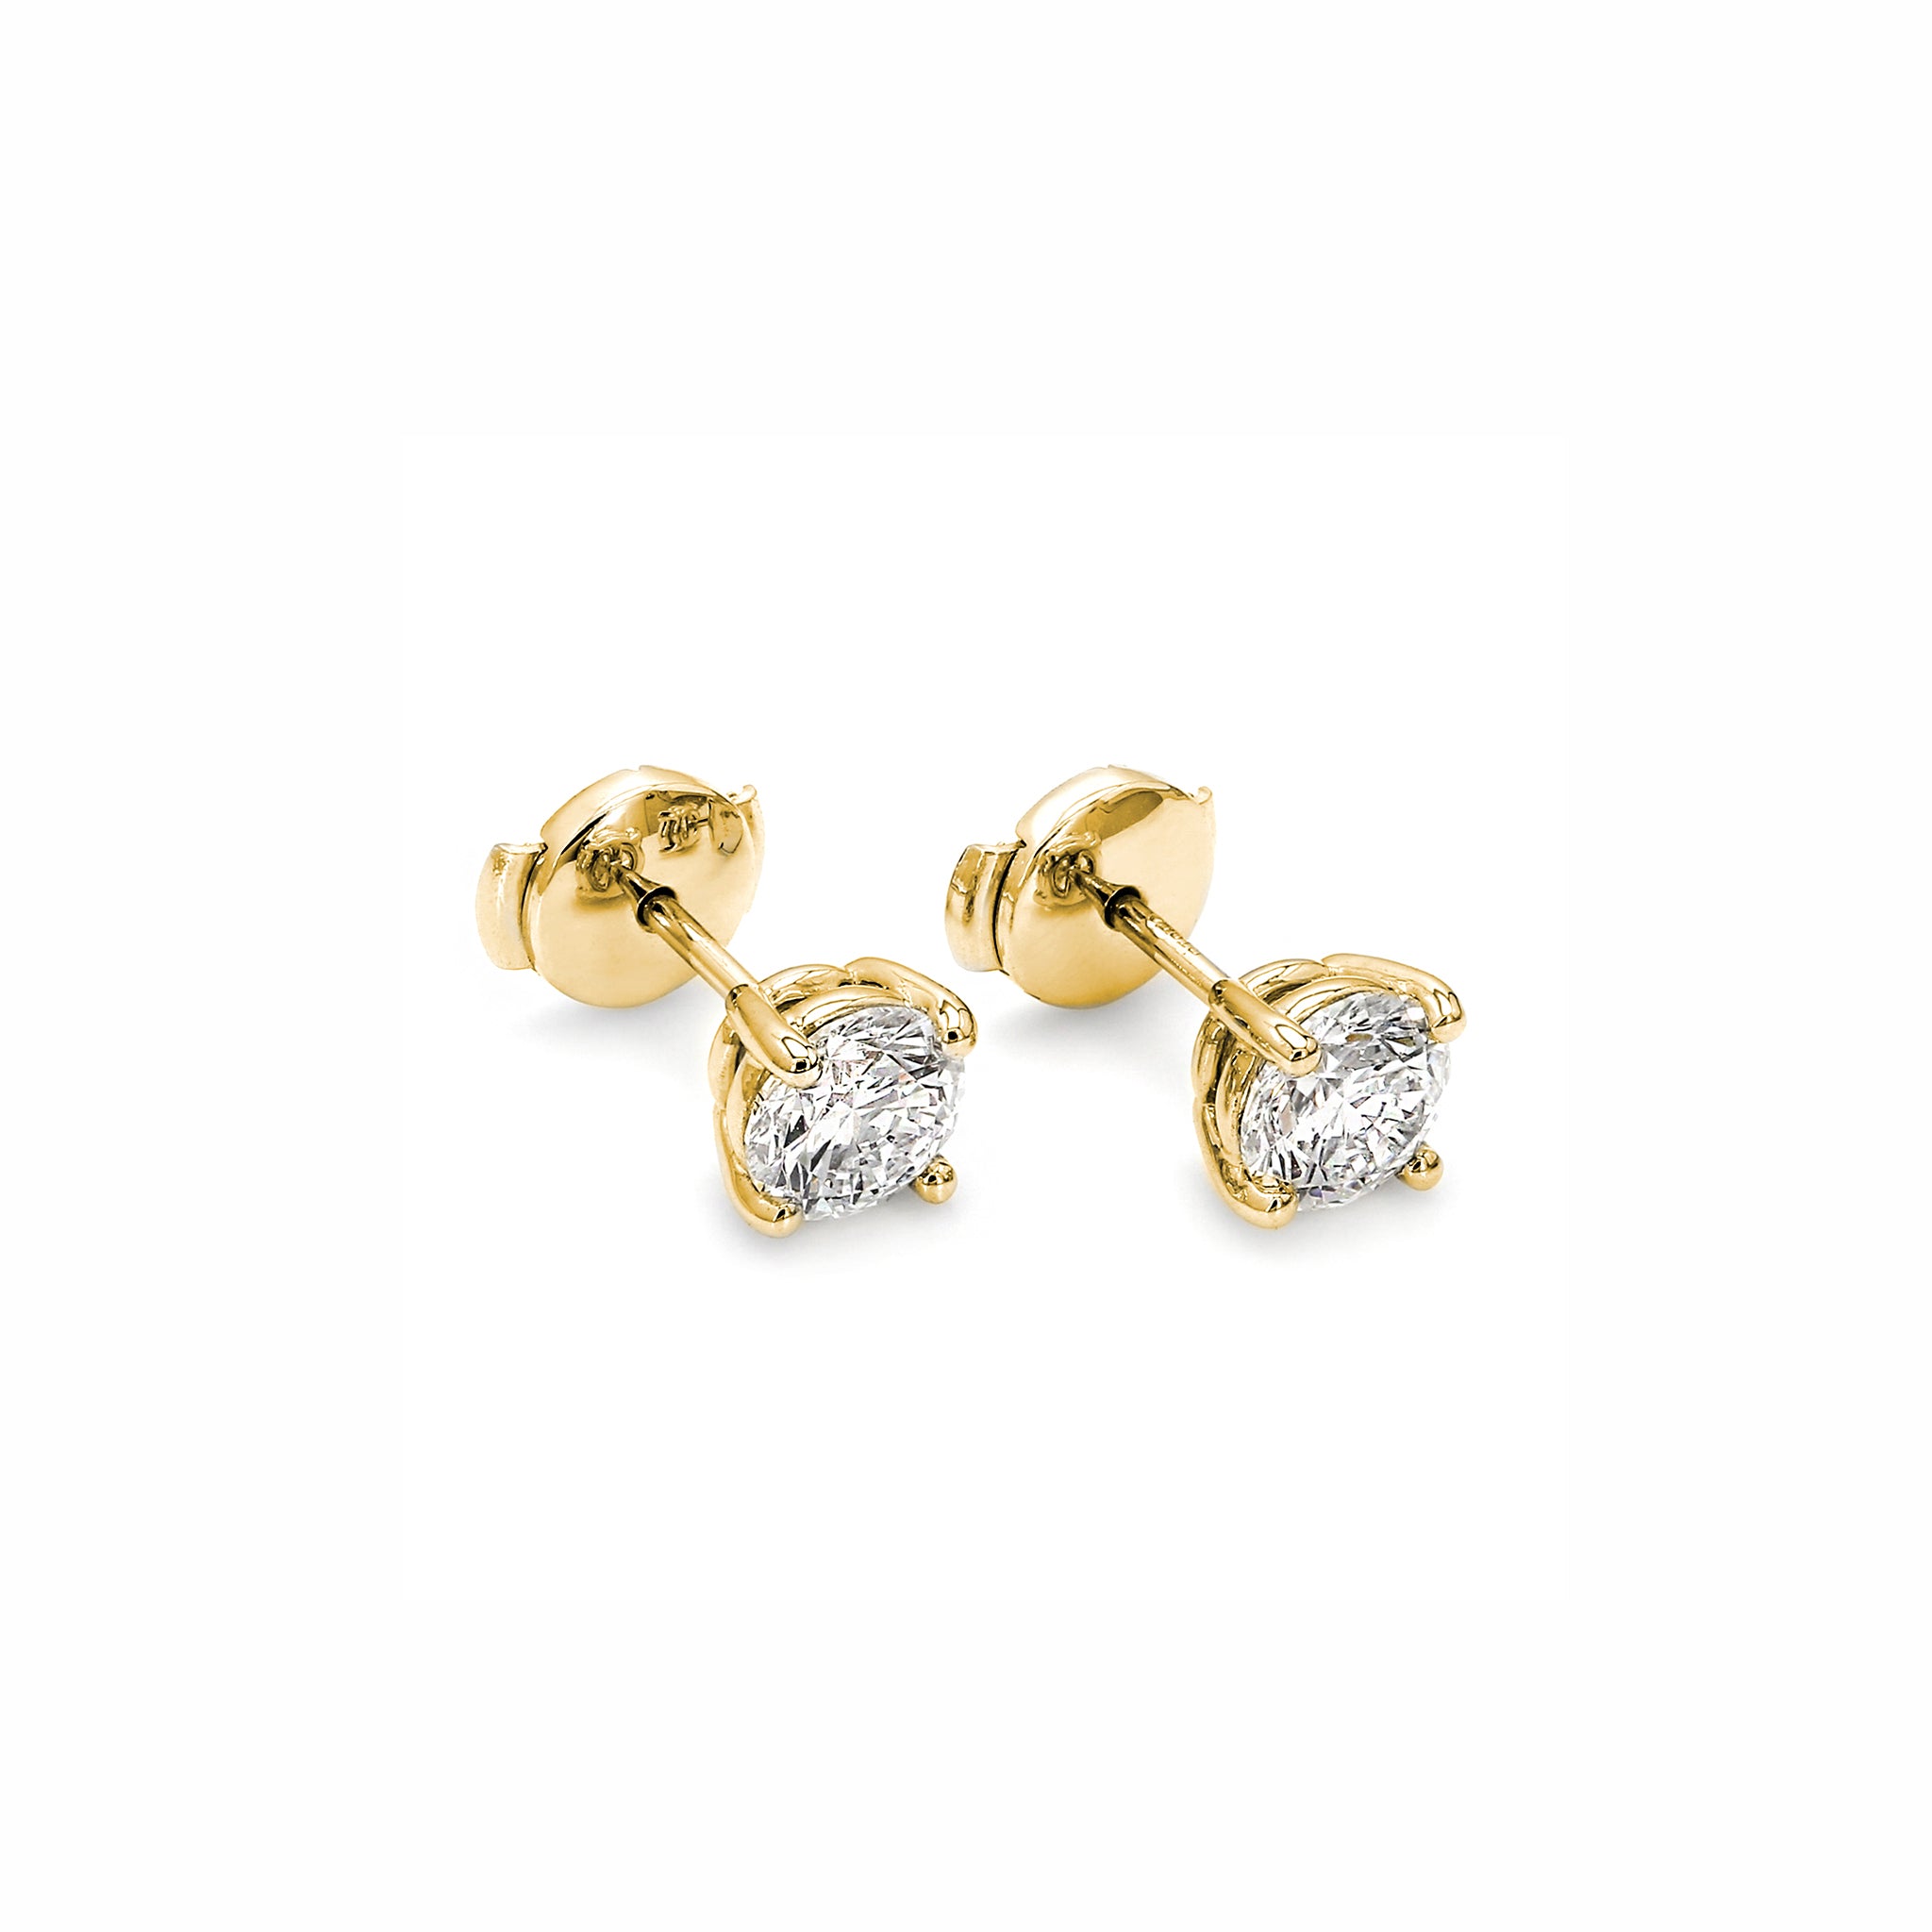 Shimansky - Classic Diamond Solitaire Earrings 0.60ct in 18K Yellow Gold